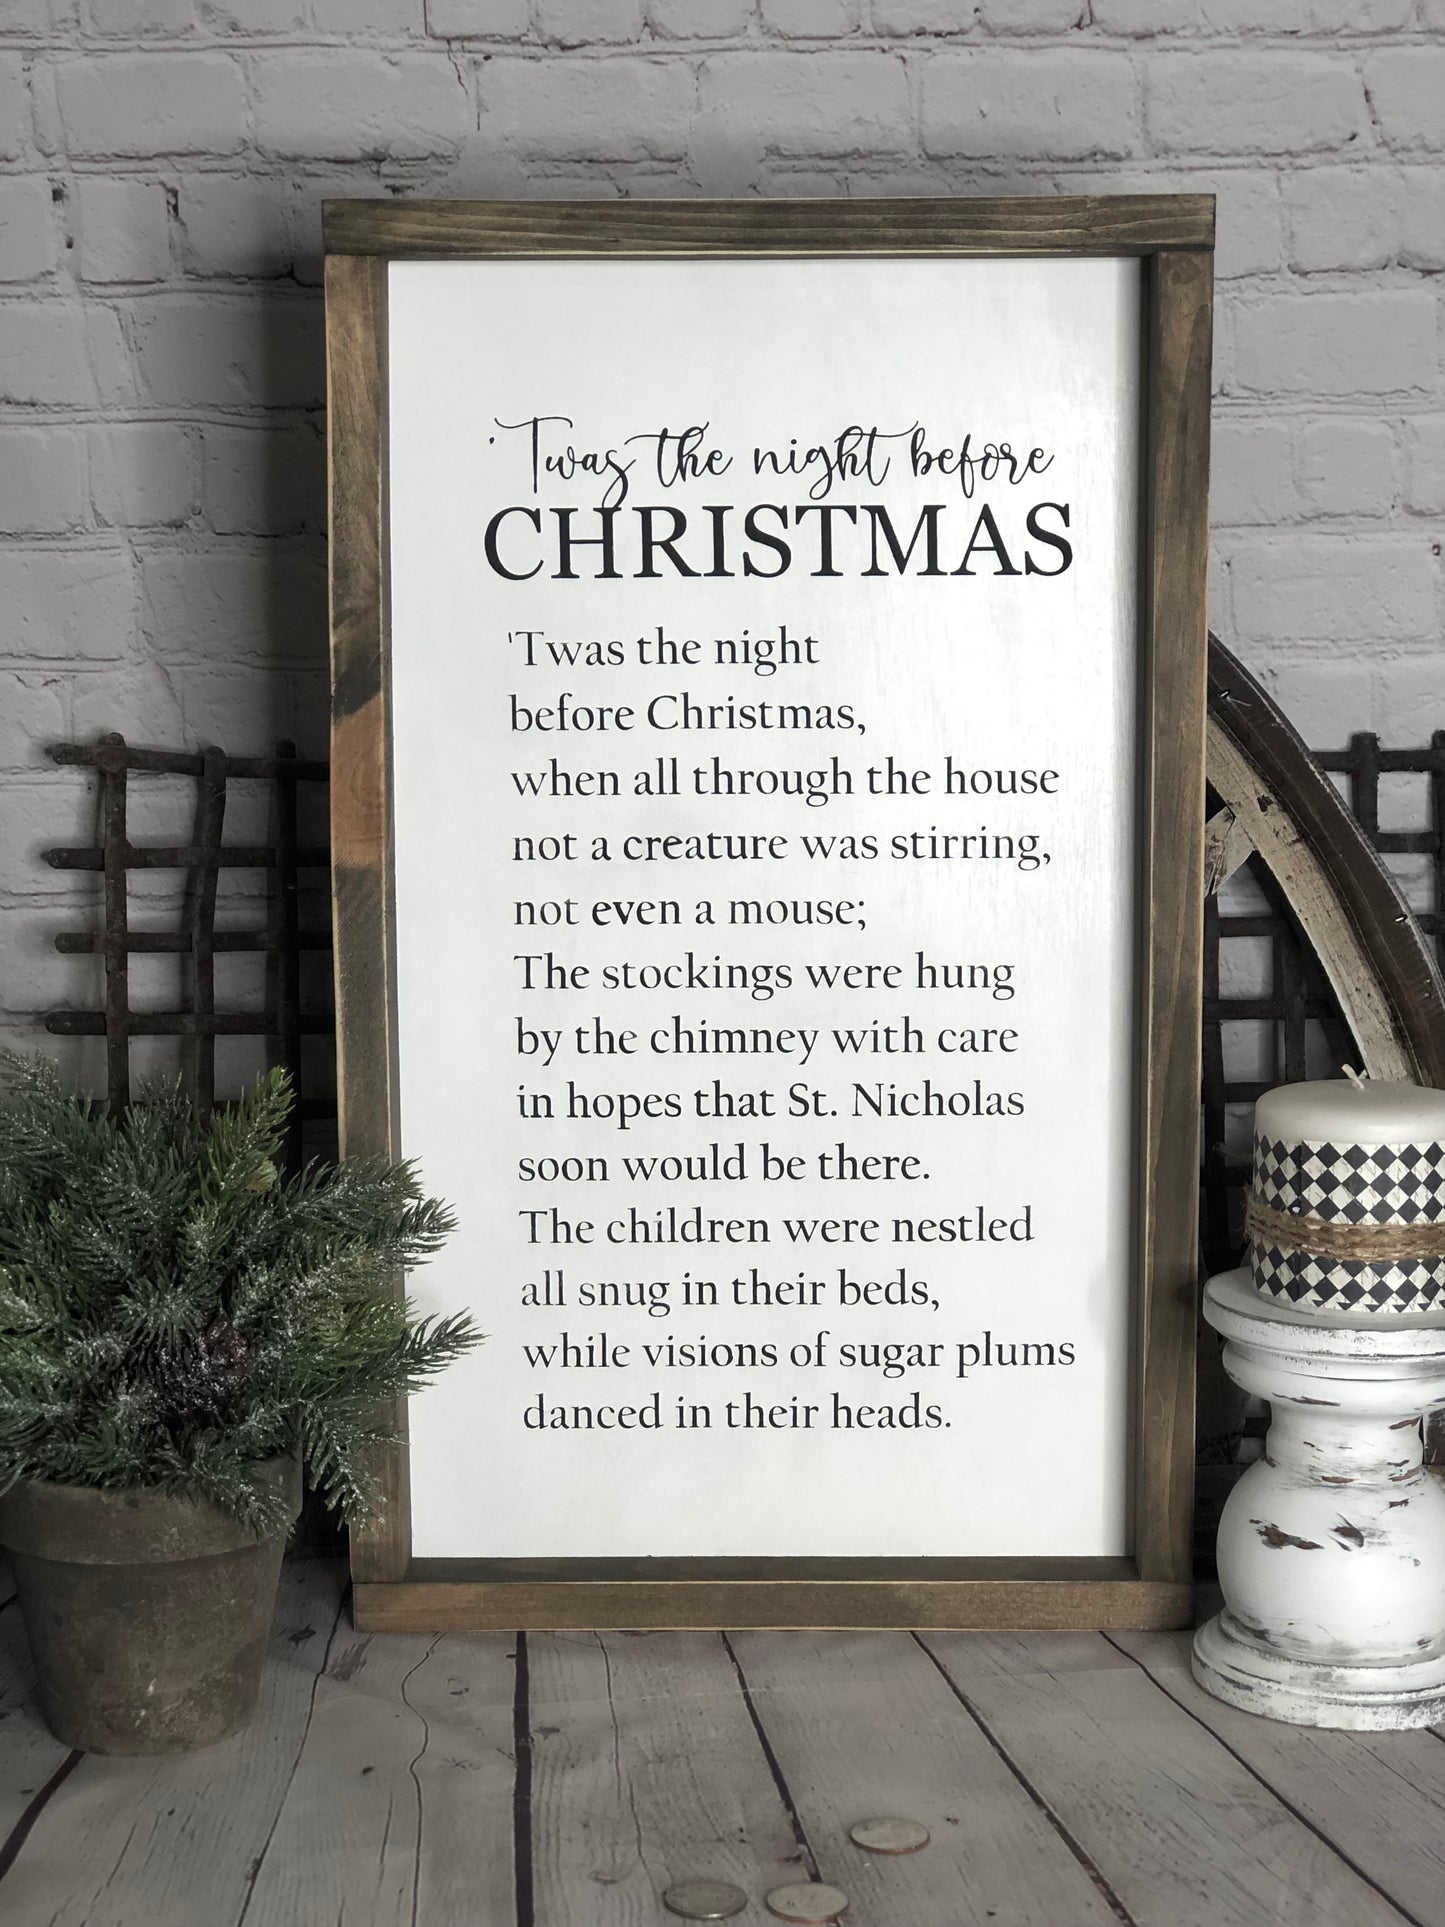 TWAS THE NIGHT BEFORE CHRISTMAS AND ALL THROUGH THE HOUSE -WOOD SIGN